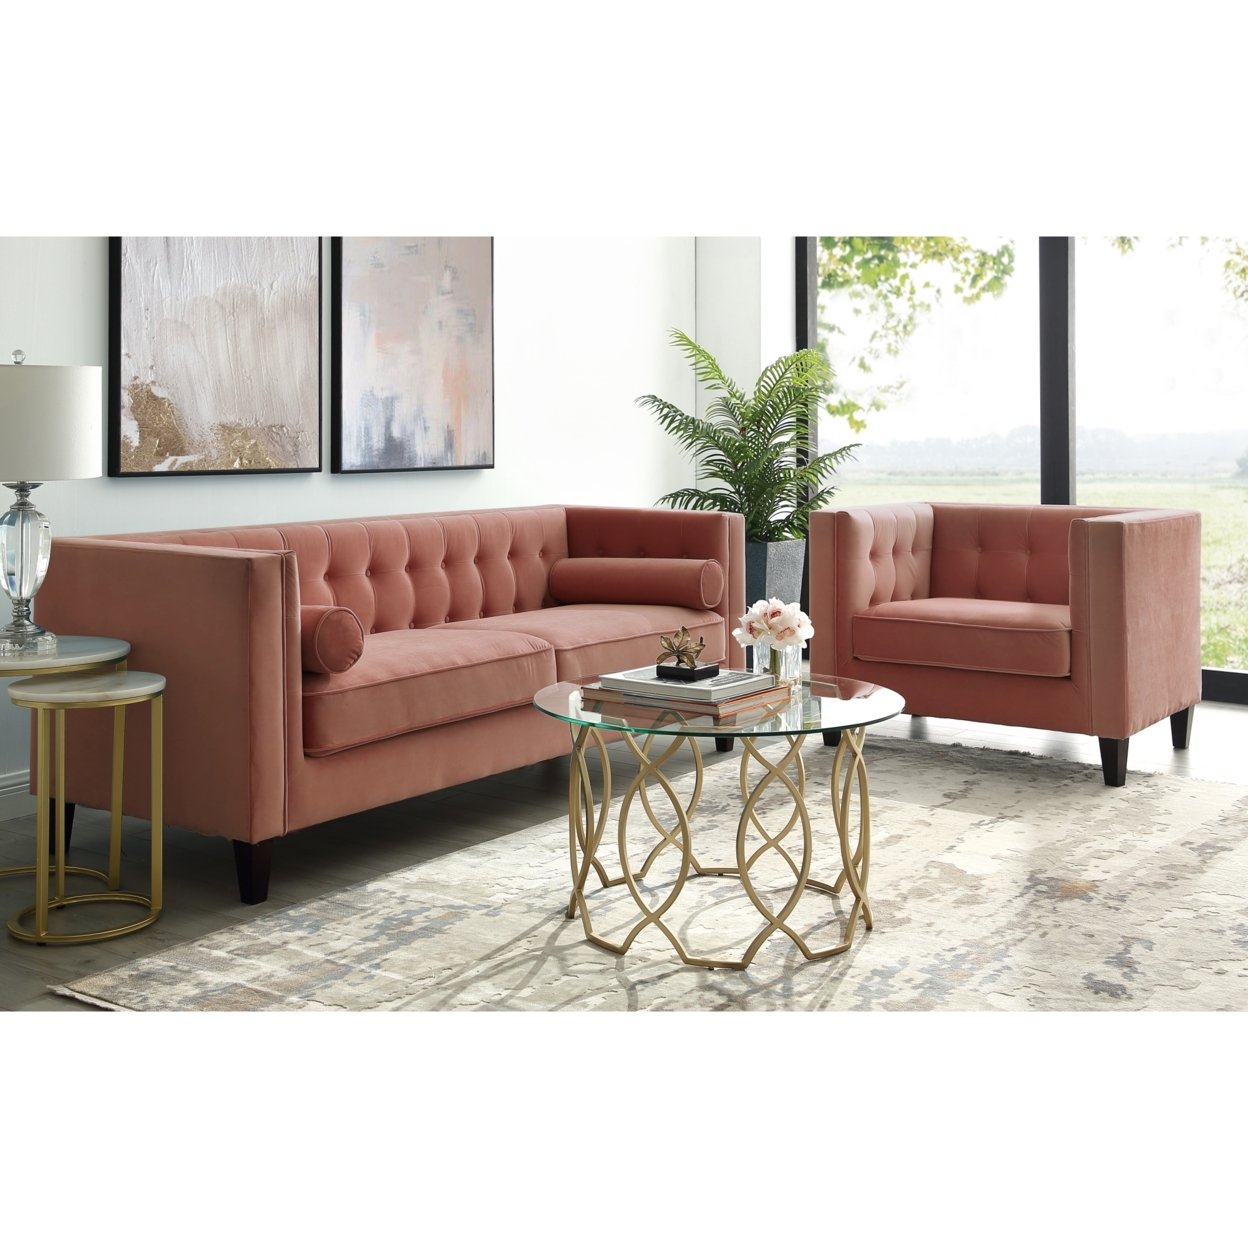 Pax Velvet Club Chair Or Sofa-Button Tufted-Tapered Legs-Square Arms-Inspired Home - Blush, Club Chair